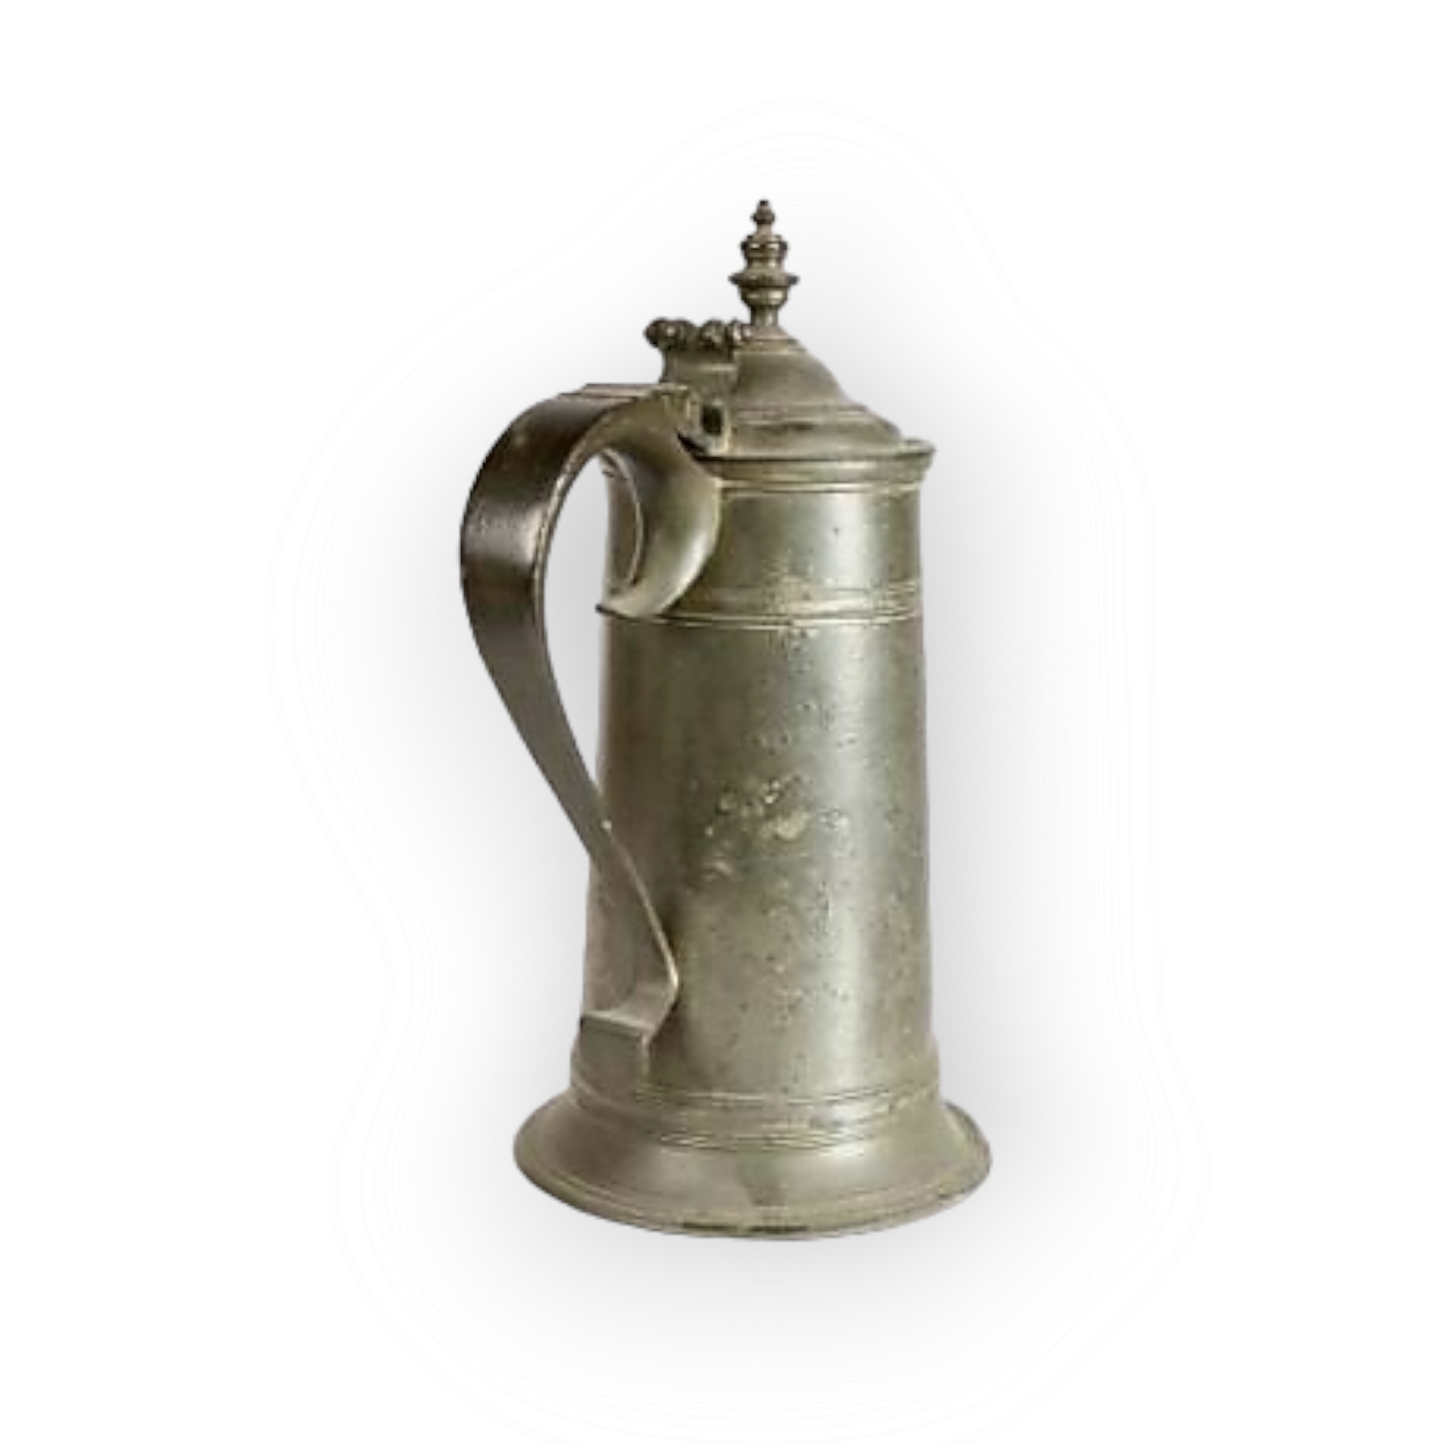 An Early 18th-Century, George I Period, English Antique Pewter Spire Flagon, circa 1715, Bearing The Touchmark for John Newman, London, (fl.1699-1733)